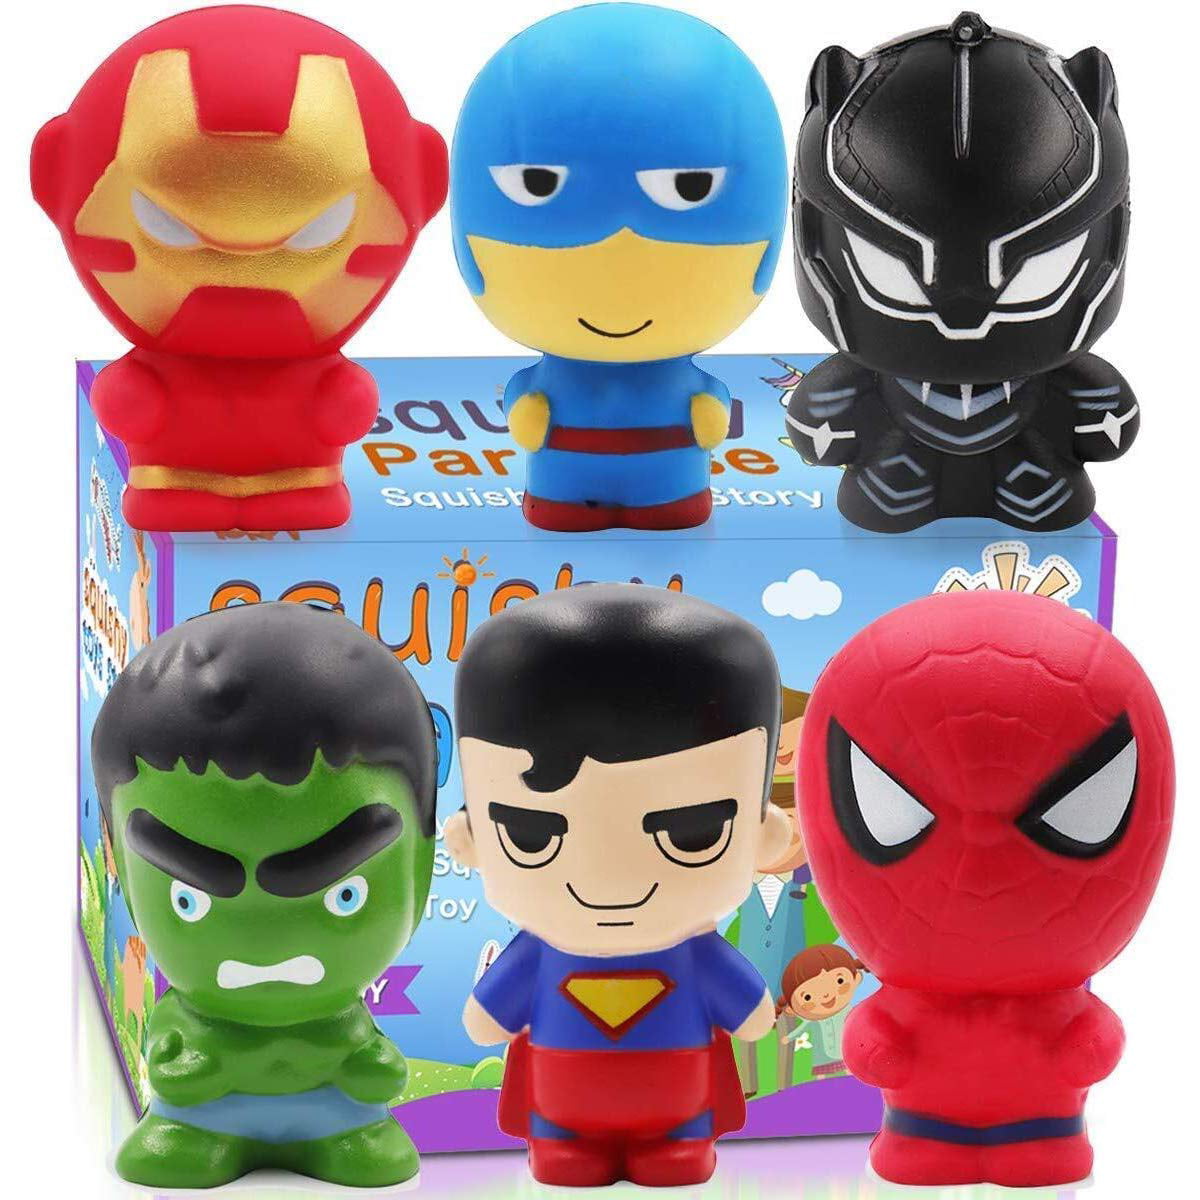 Zoom Buy Captain America Comic Ease Squishies Slow Rising Marvel Avengers Super Hero Kawaii New Unique Squishy Stress Relief Figures 